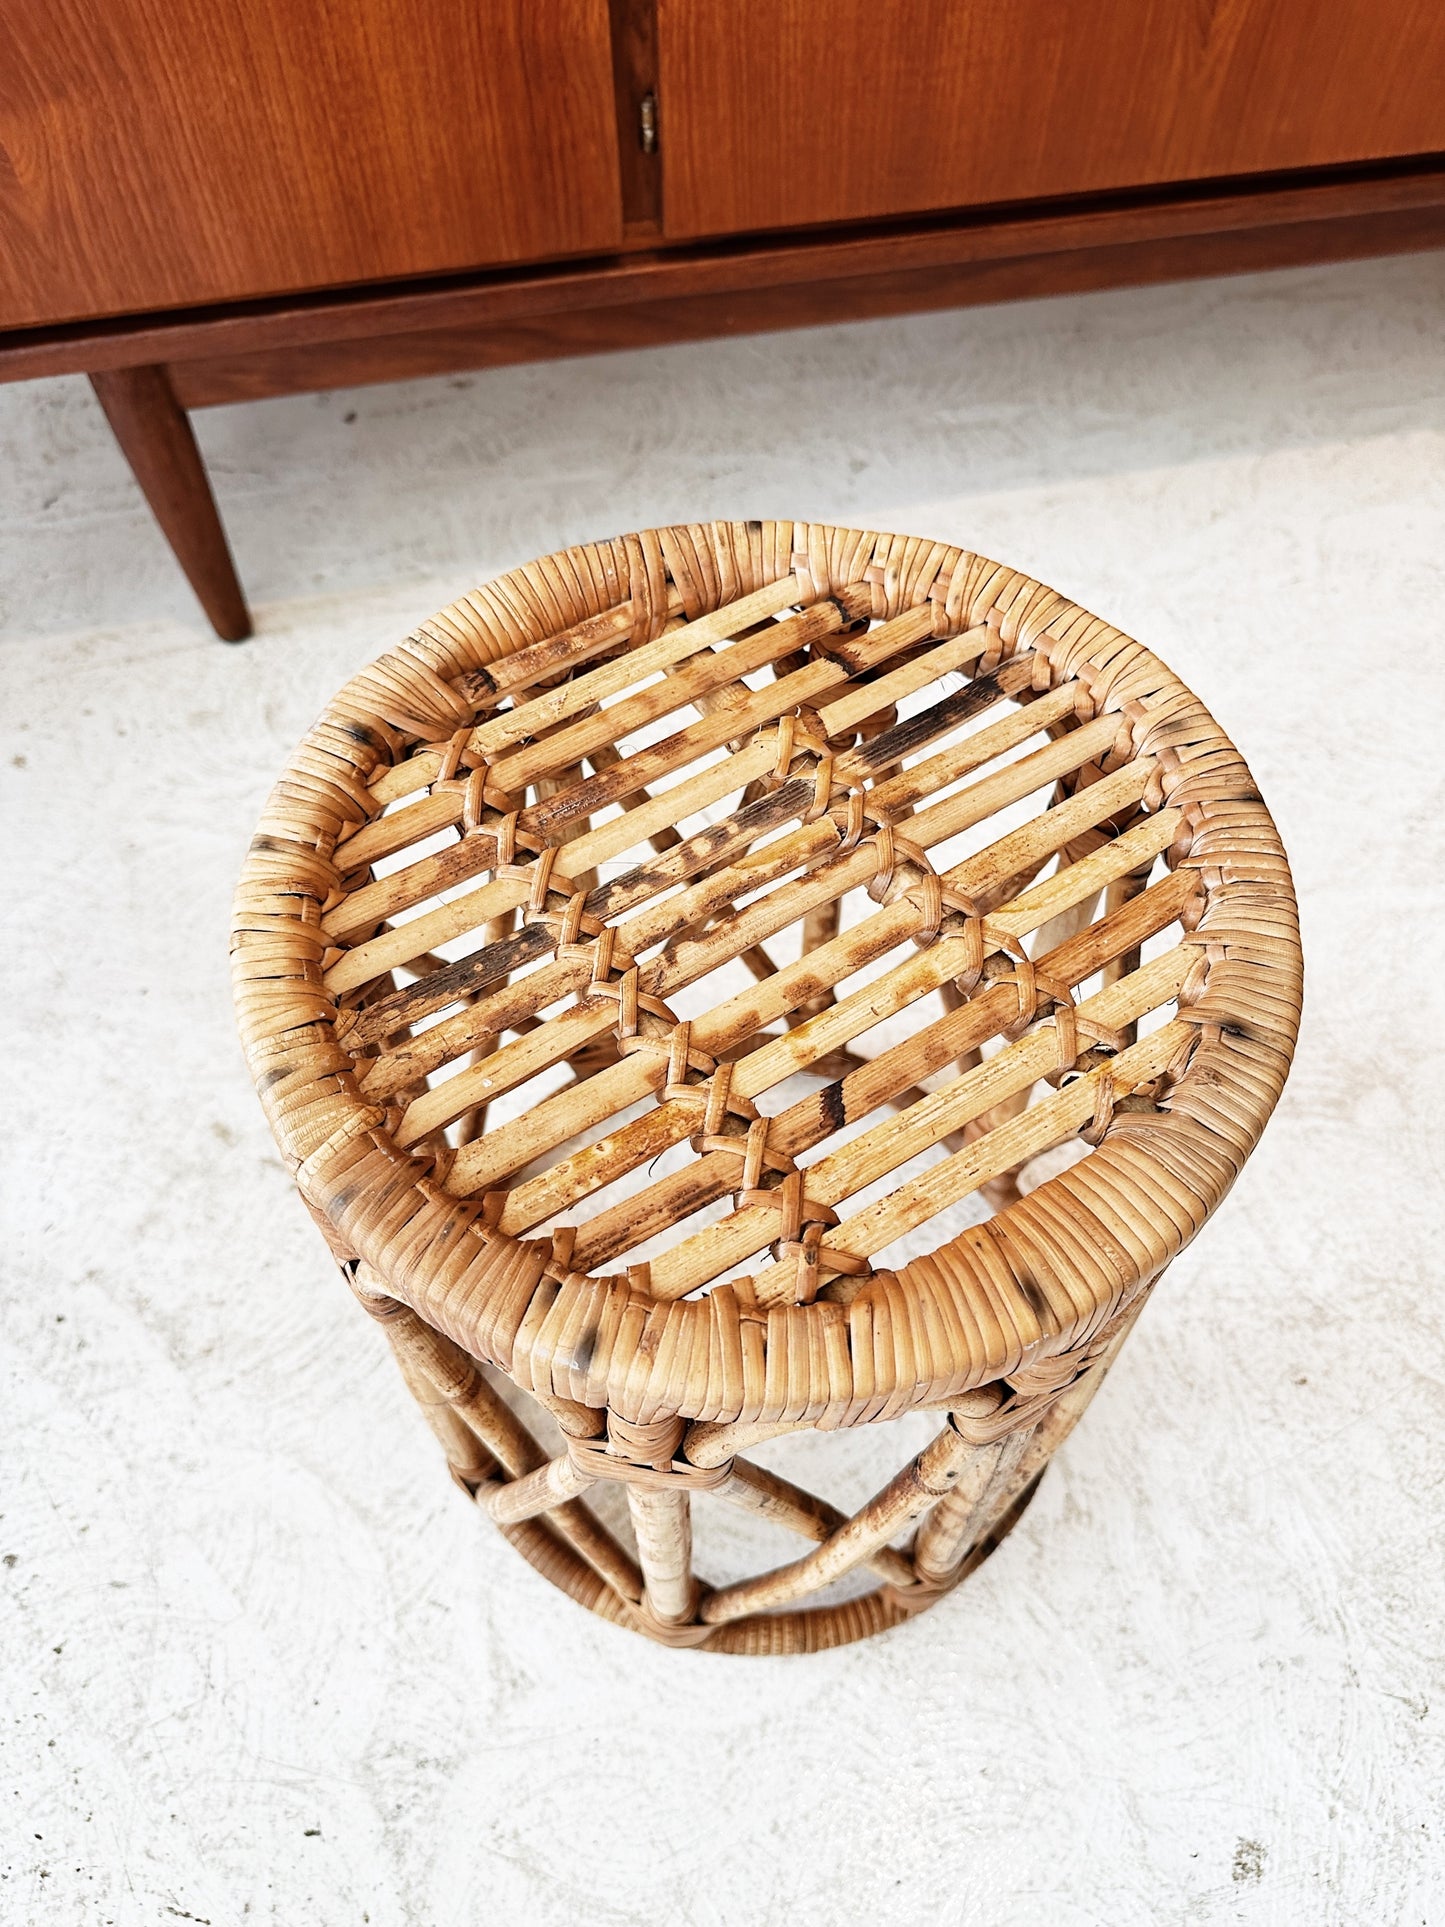 Vintage Rattan Side Table / Plant Stand